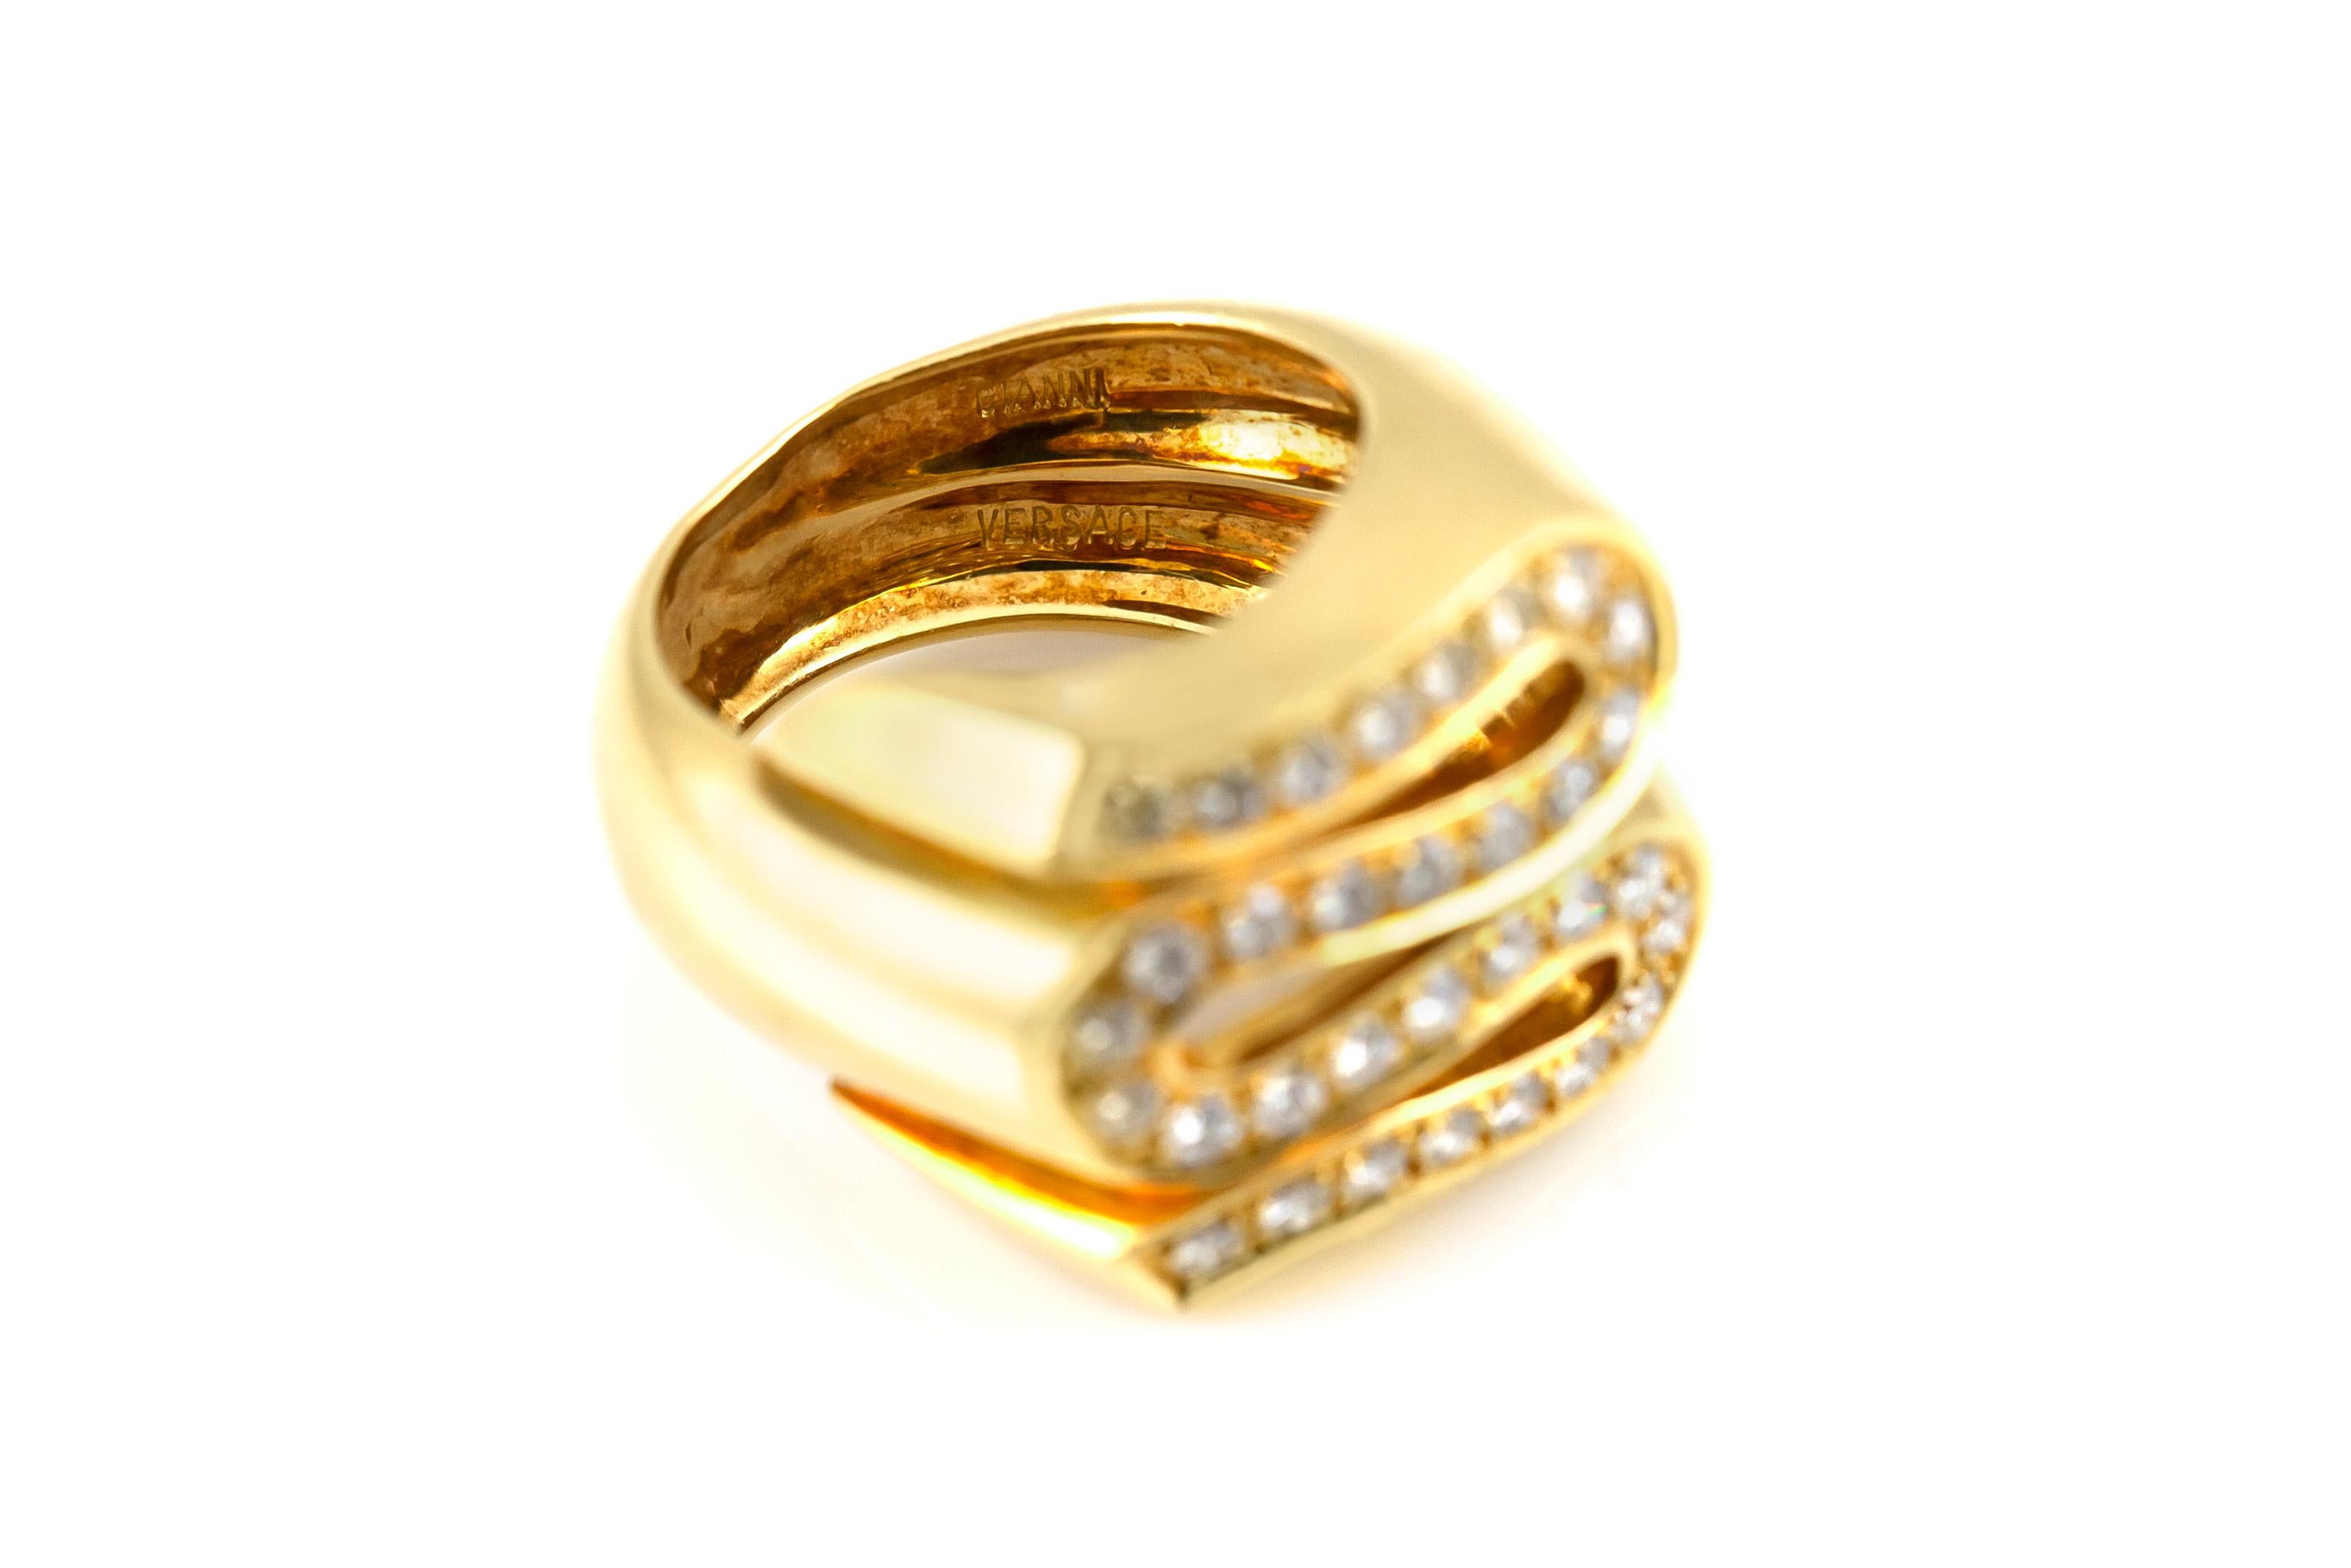 The ring is finely crafted in 18k yellow gold with diamonds weighing approximately total of 1.00 carat.
Circa 1980